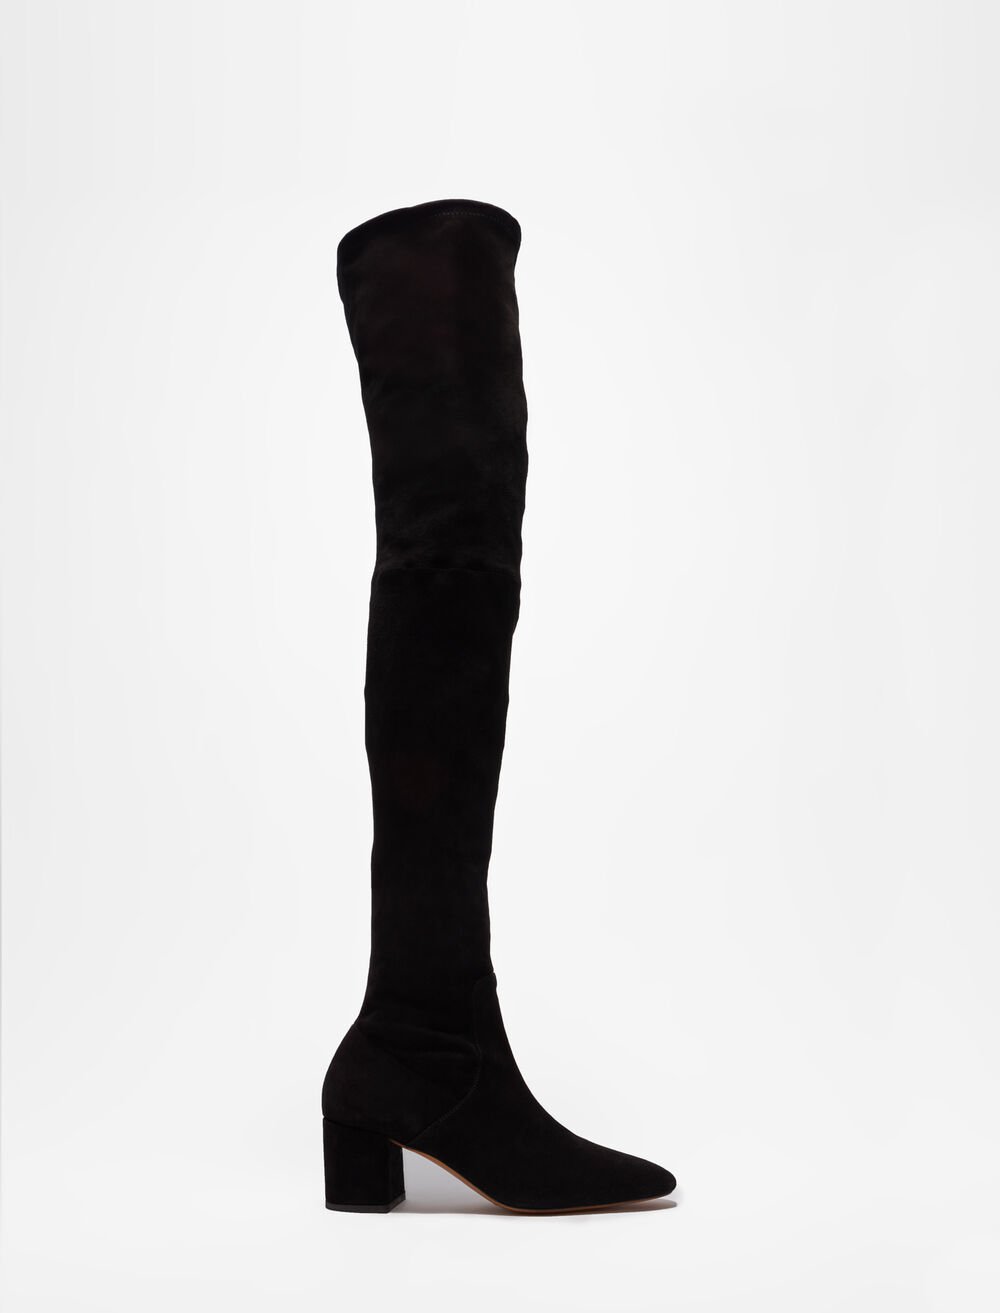 Maje Faeni Heeled Thigh-High Boots in Black Suede.jpg